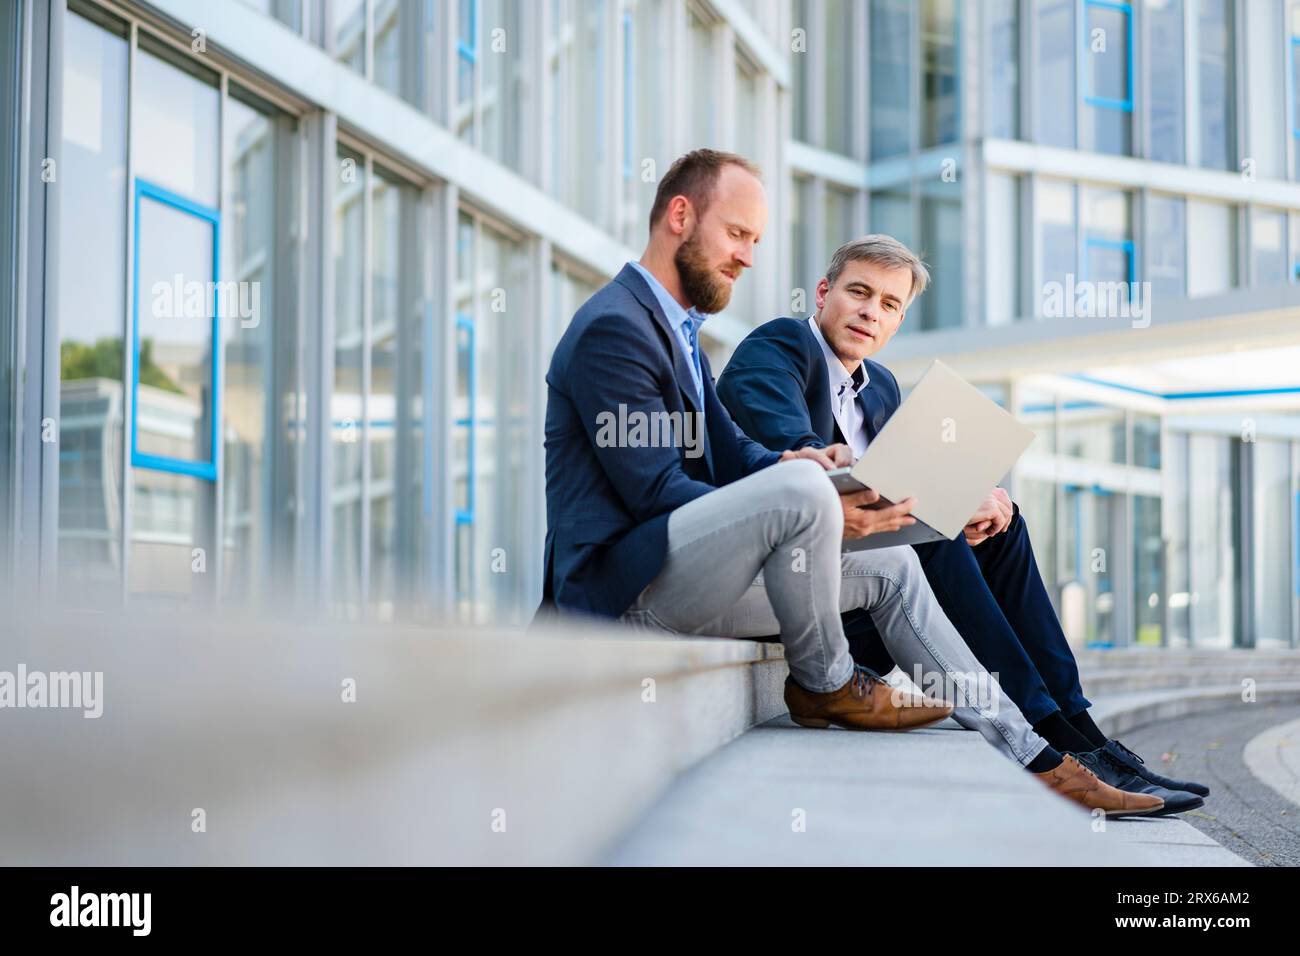 Two business colleagues sitting on steps working together on laptop Stock Photo